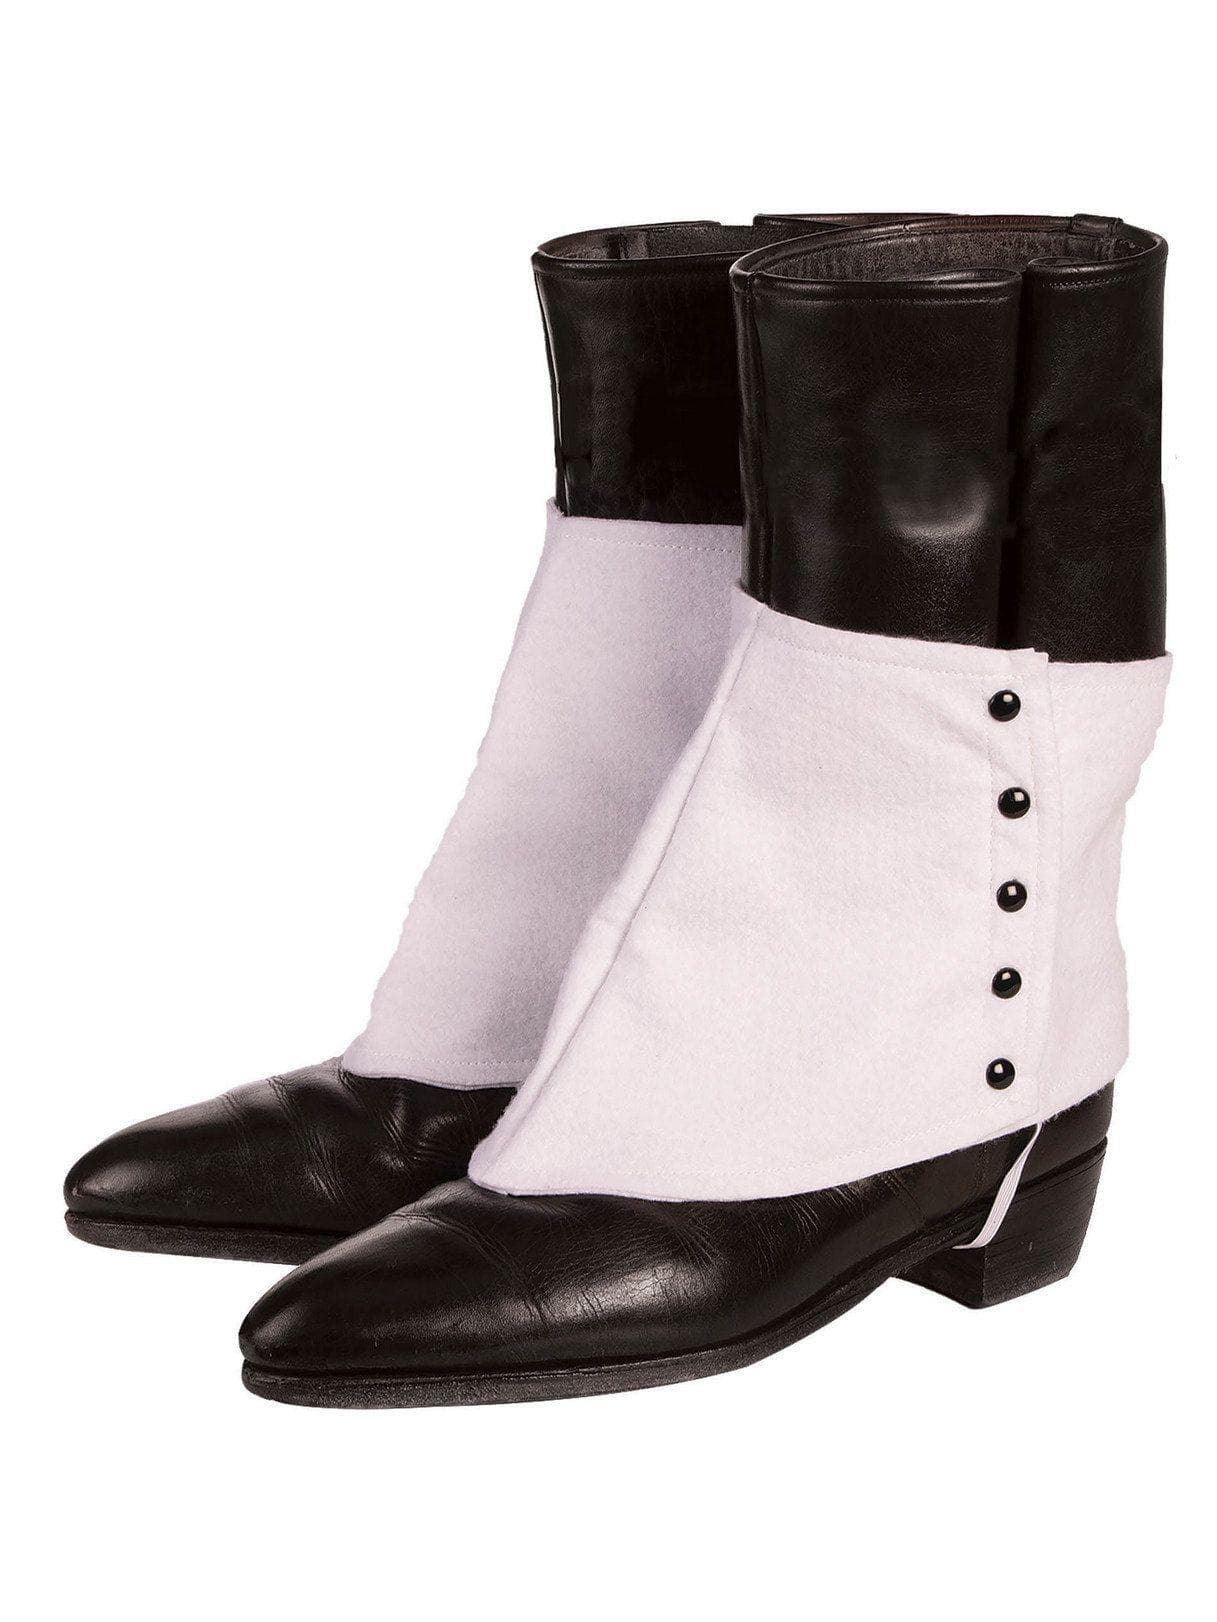 Gangster Spats with Buttons - costumes.com